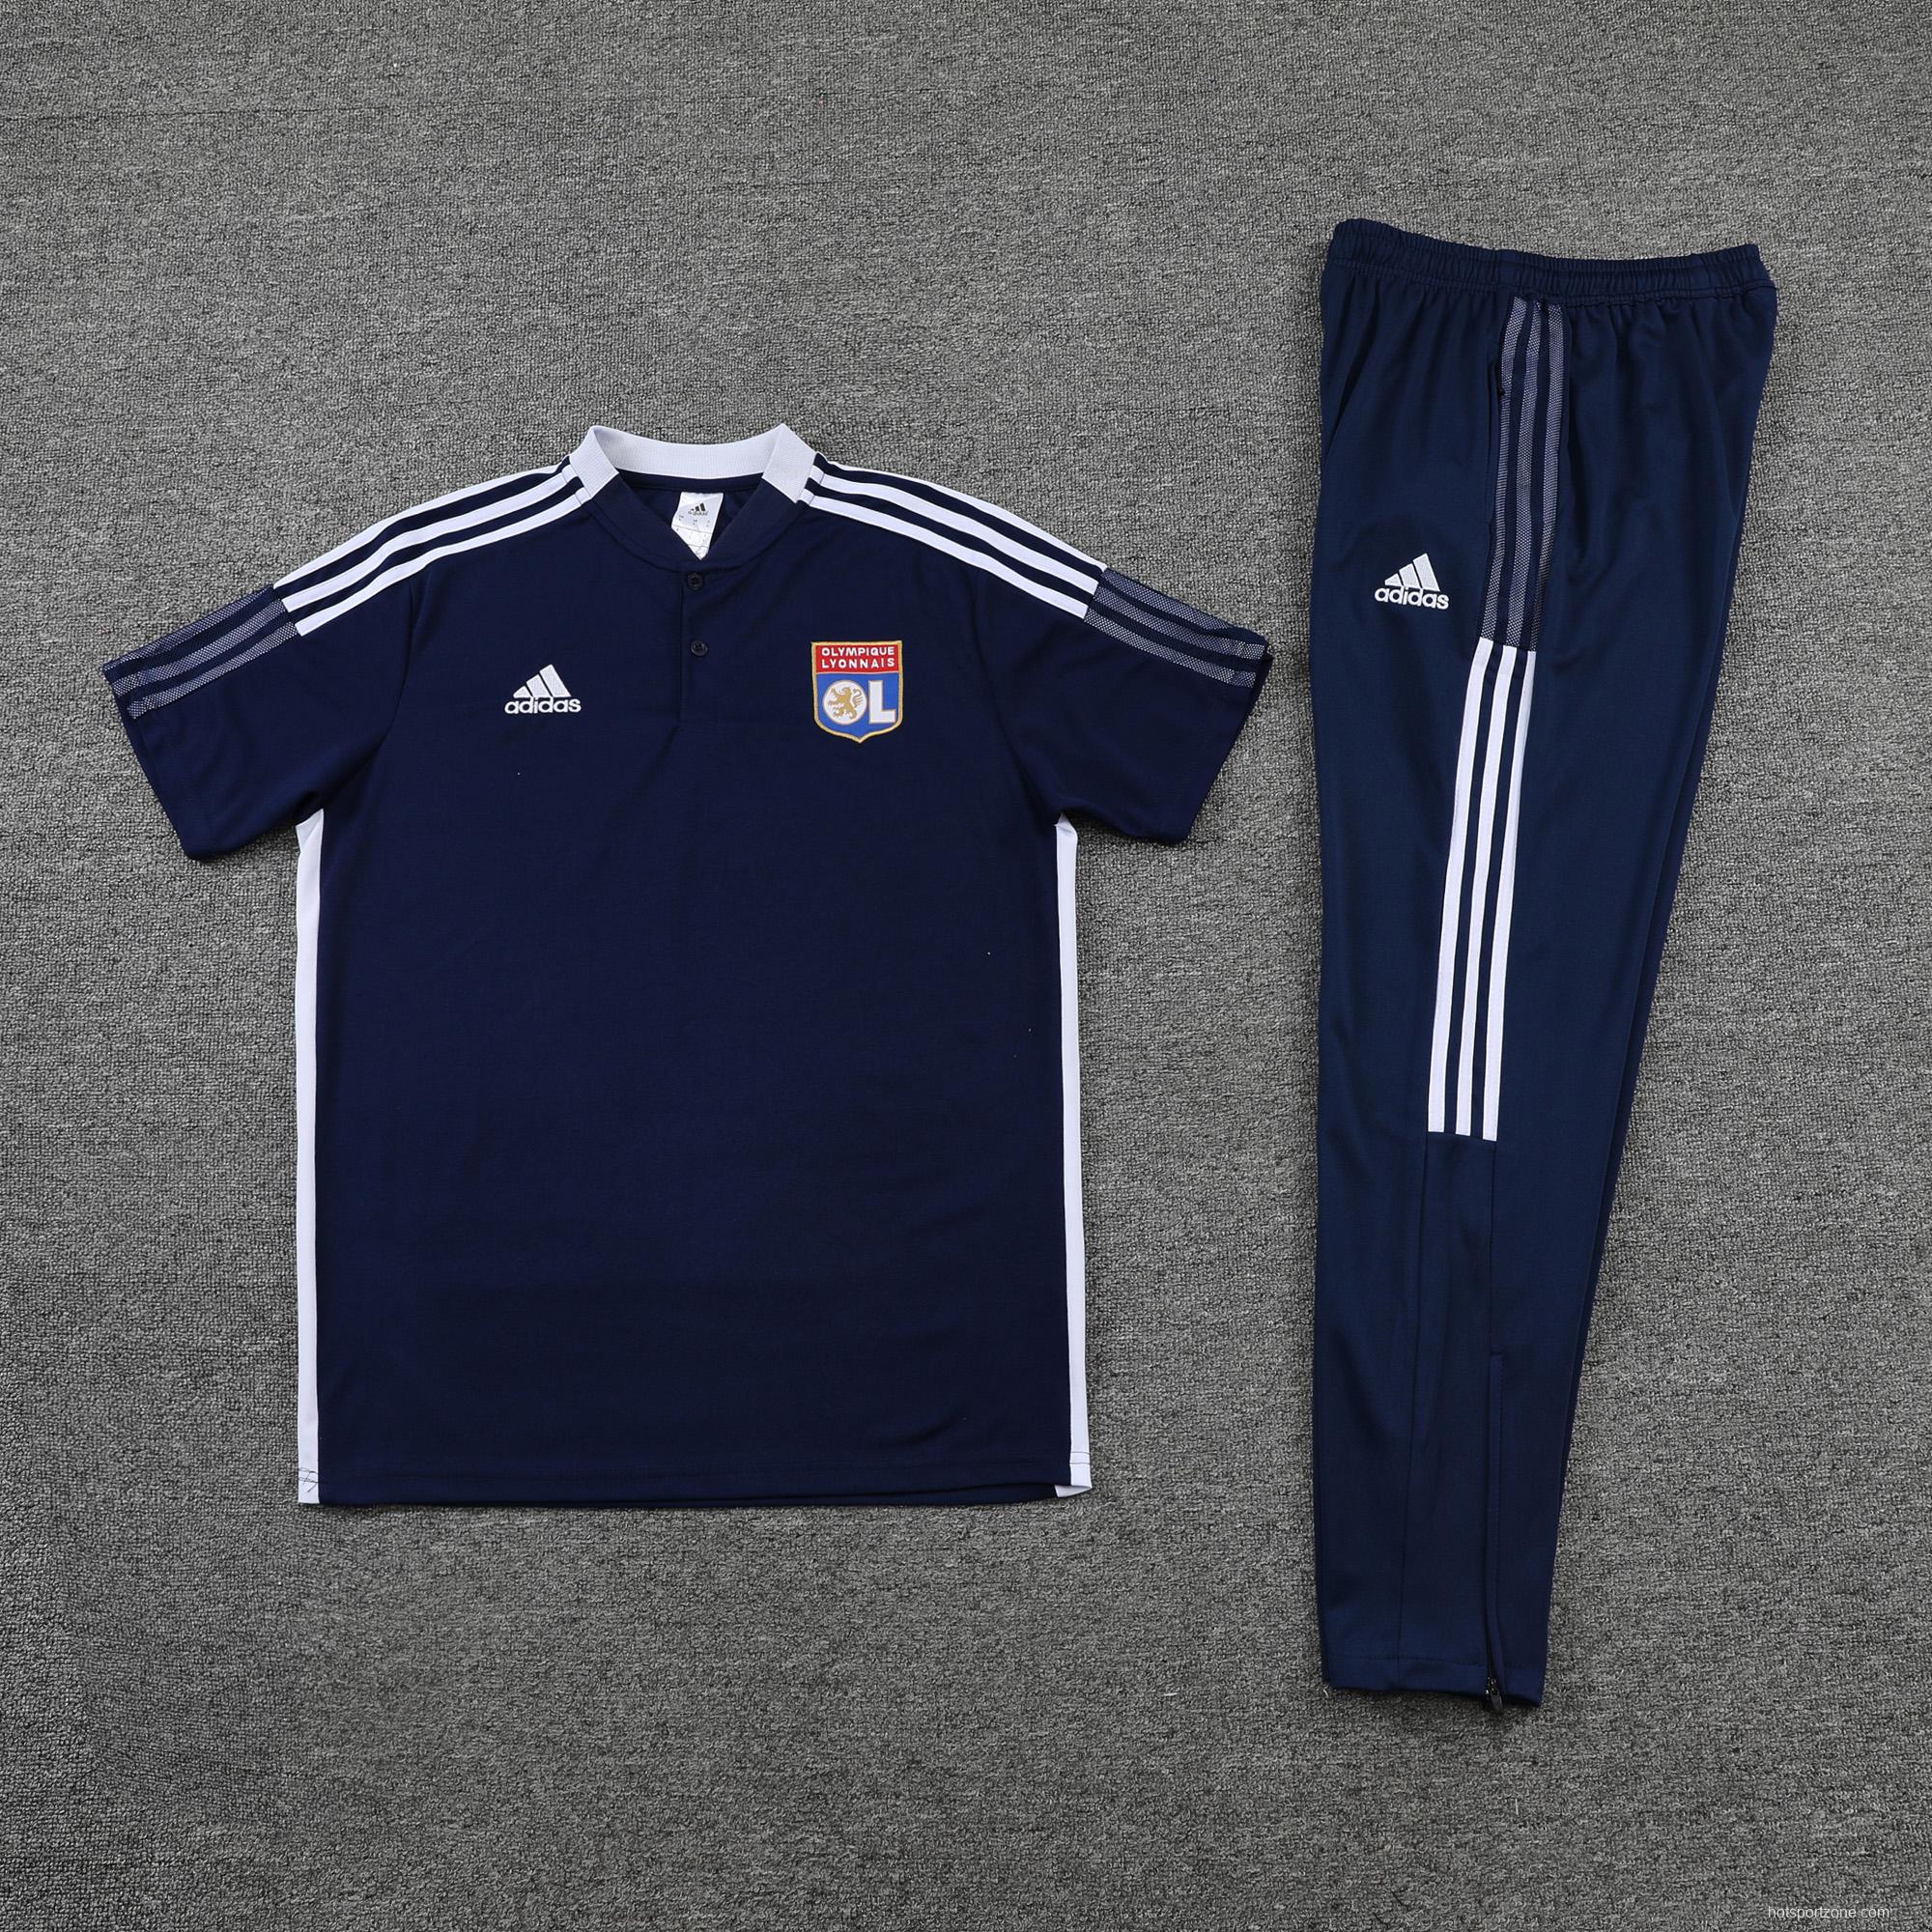 Olympique Lyonnais POLO kit dark blue (not supported to be sold separately)